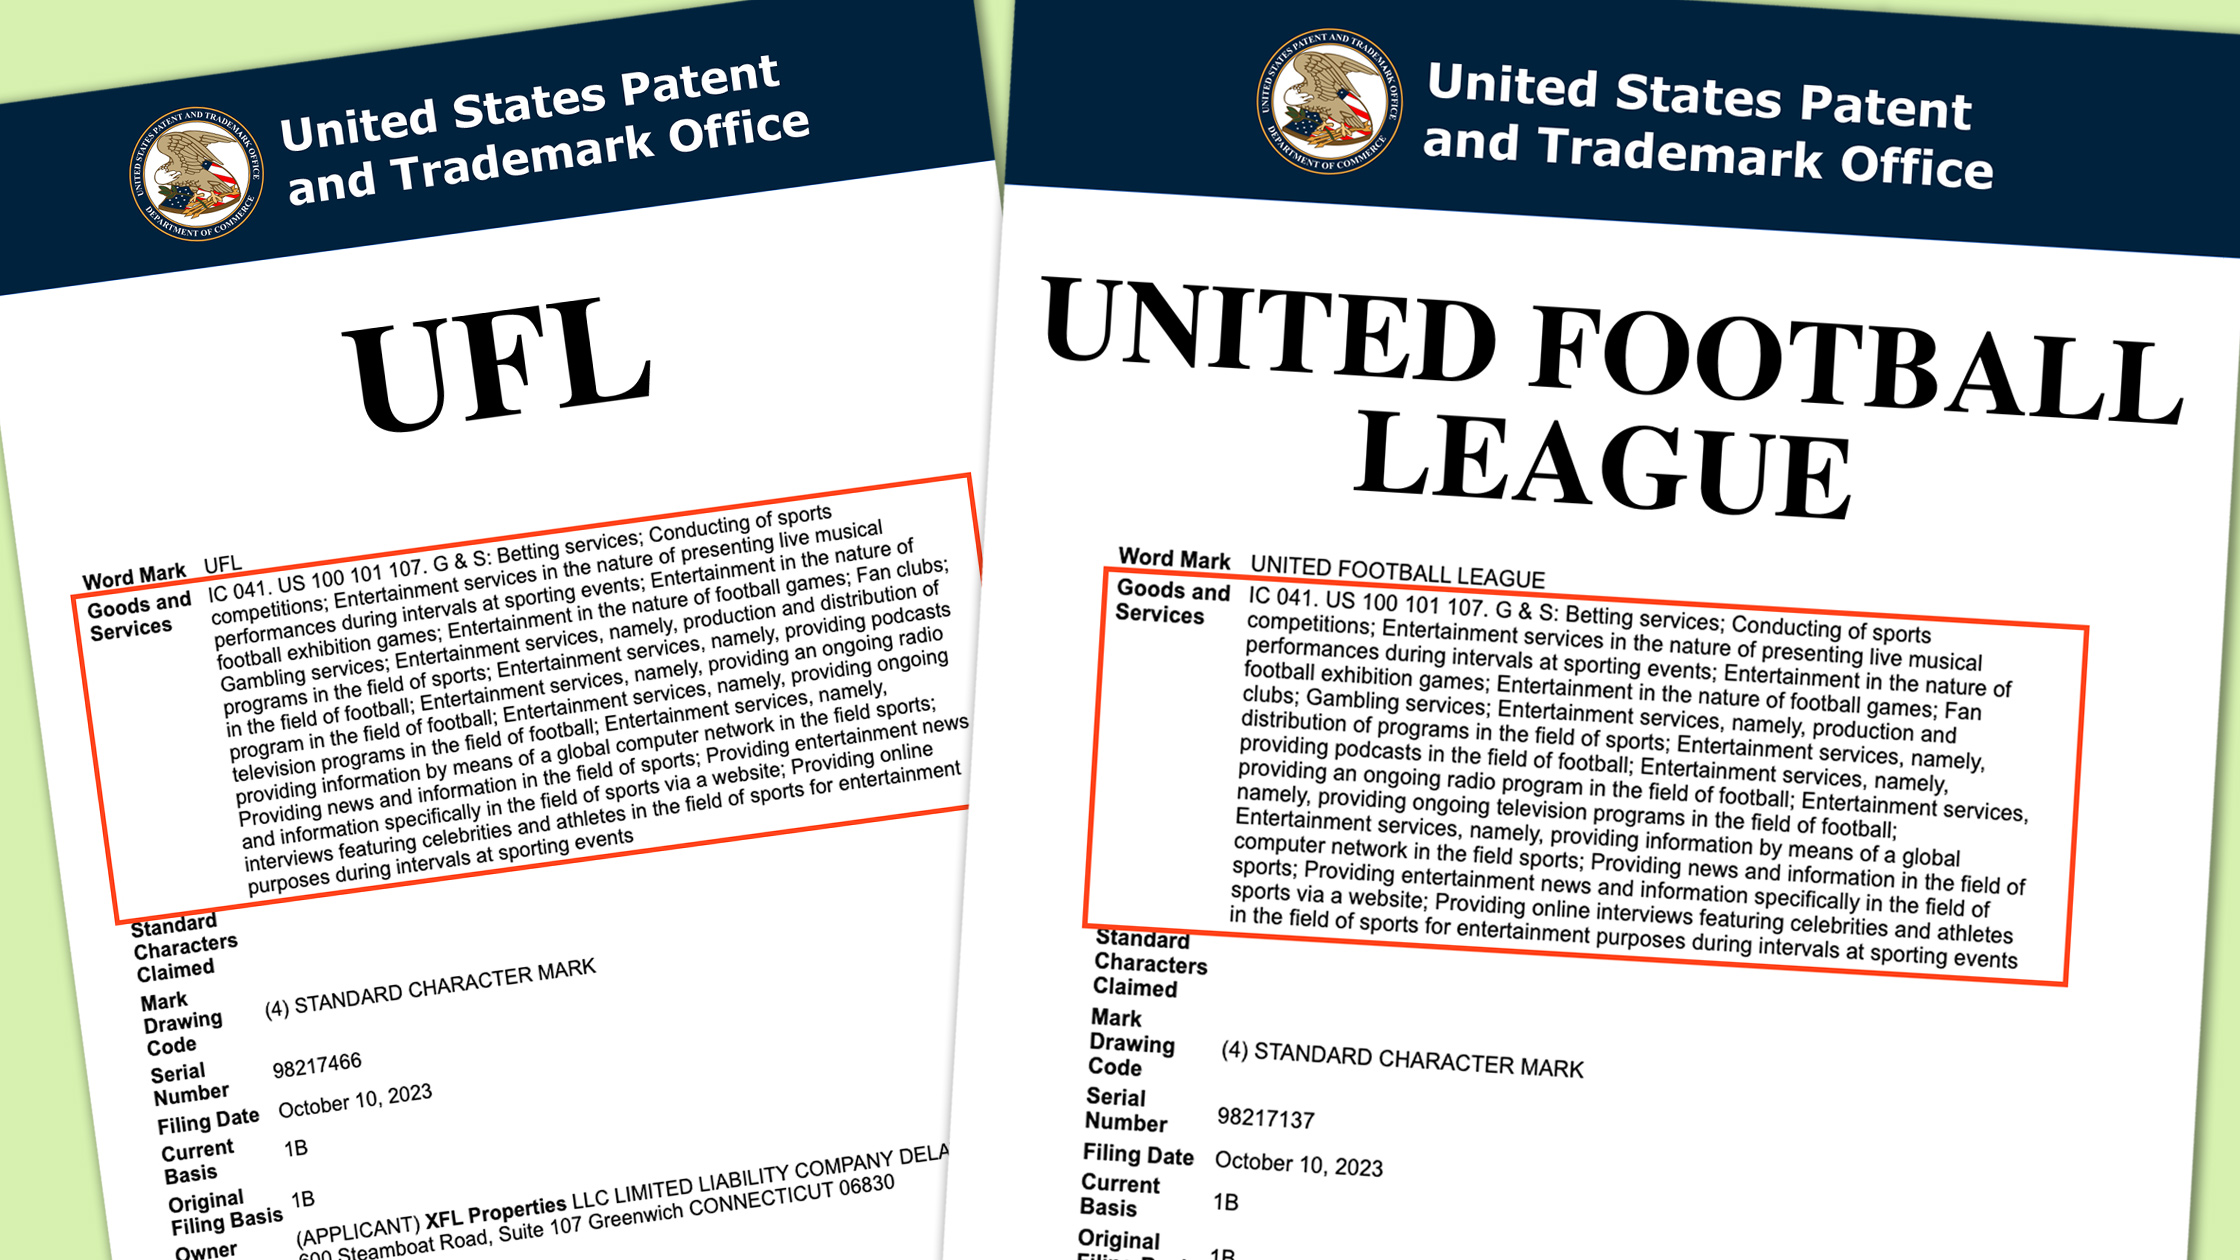 USPTO Trademark Applications for UFL and United Football League.